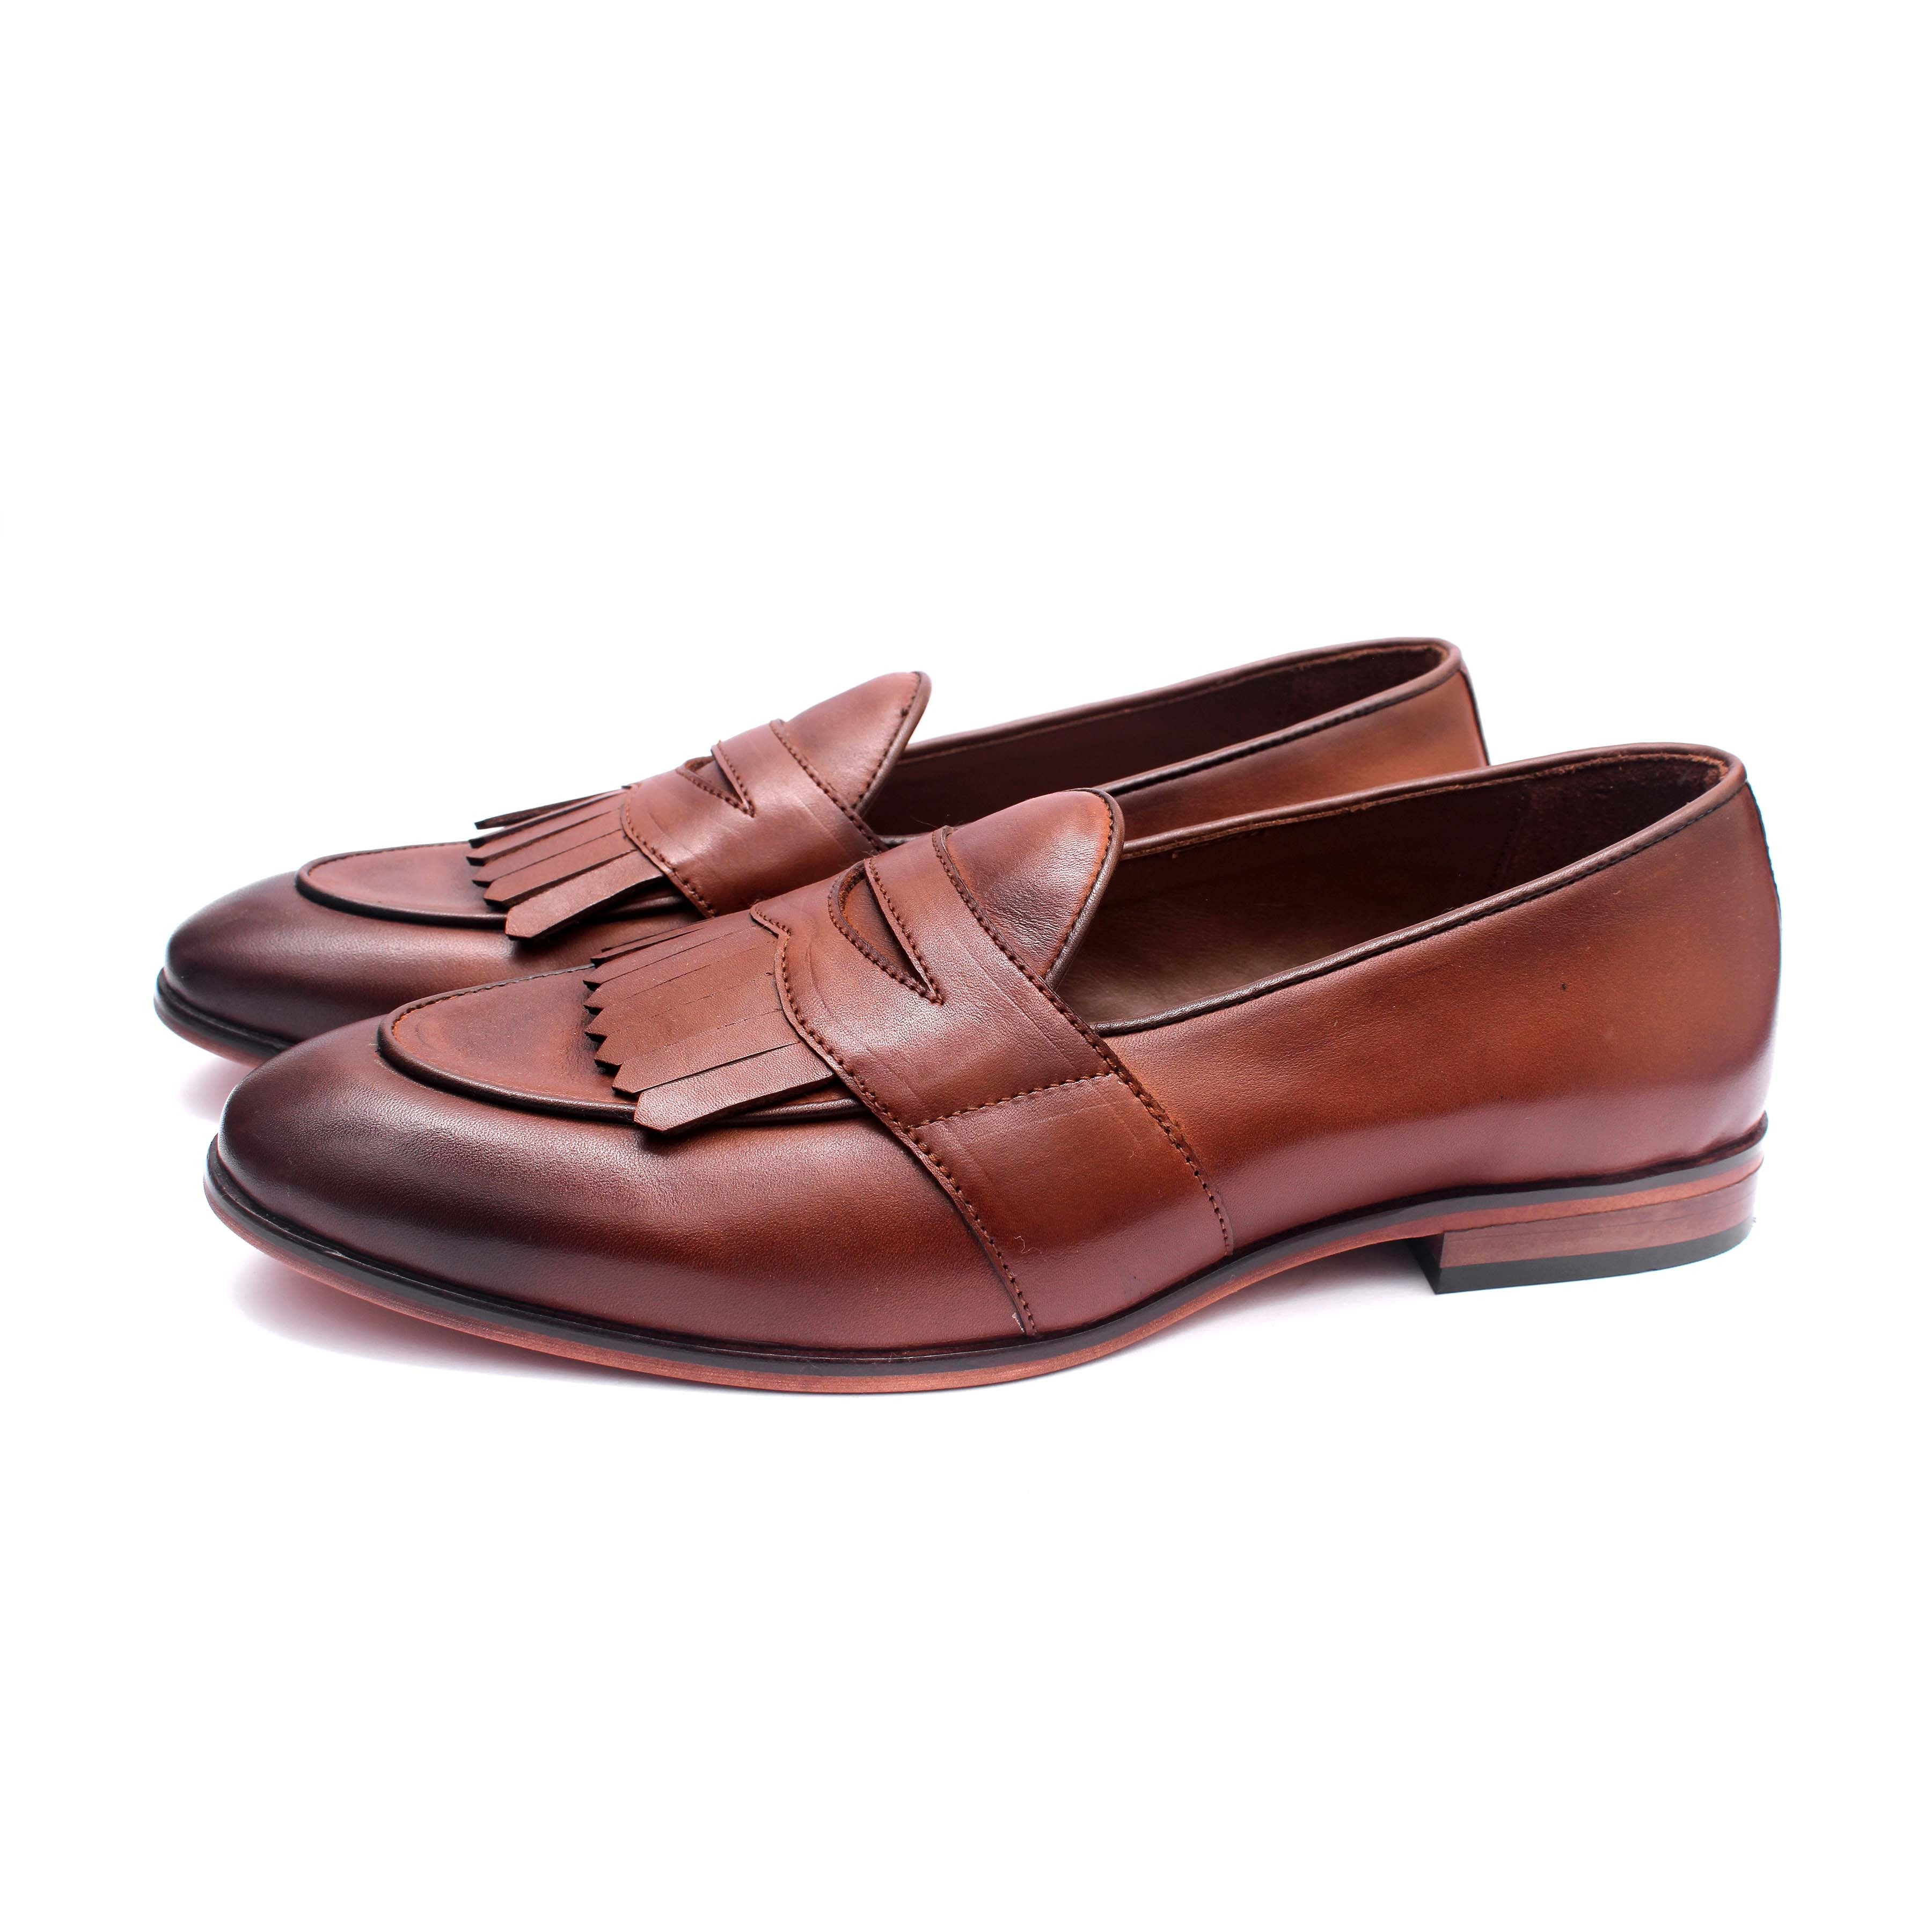 Loafers With Saddle&Fringes